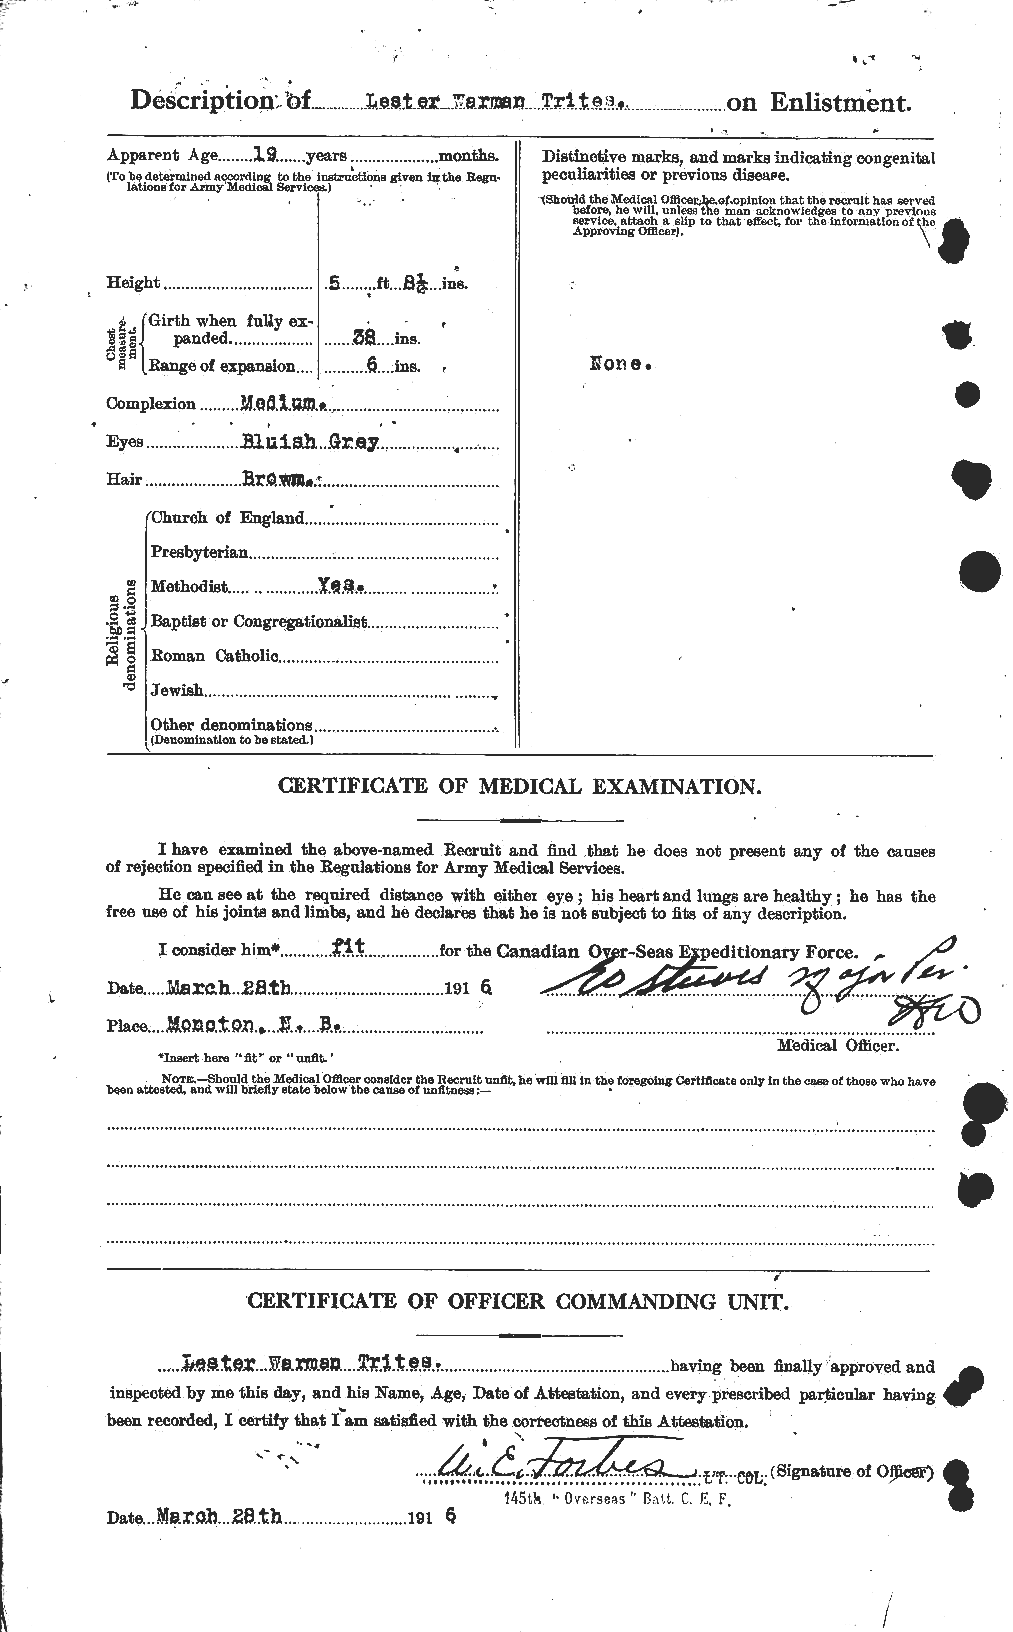 Personnel Records of the First World War - CEF 640155b